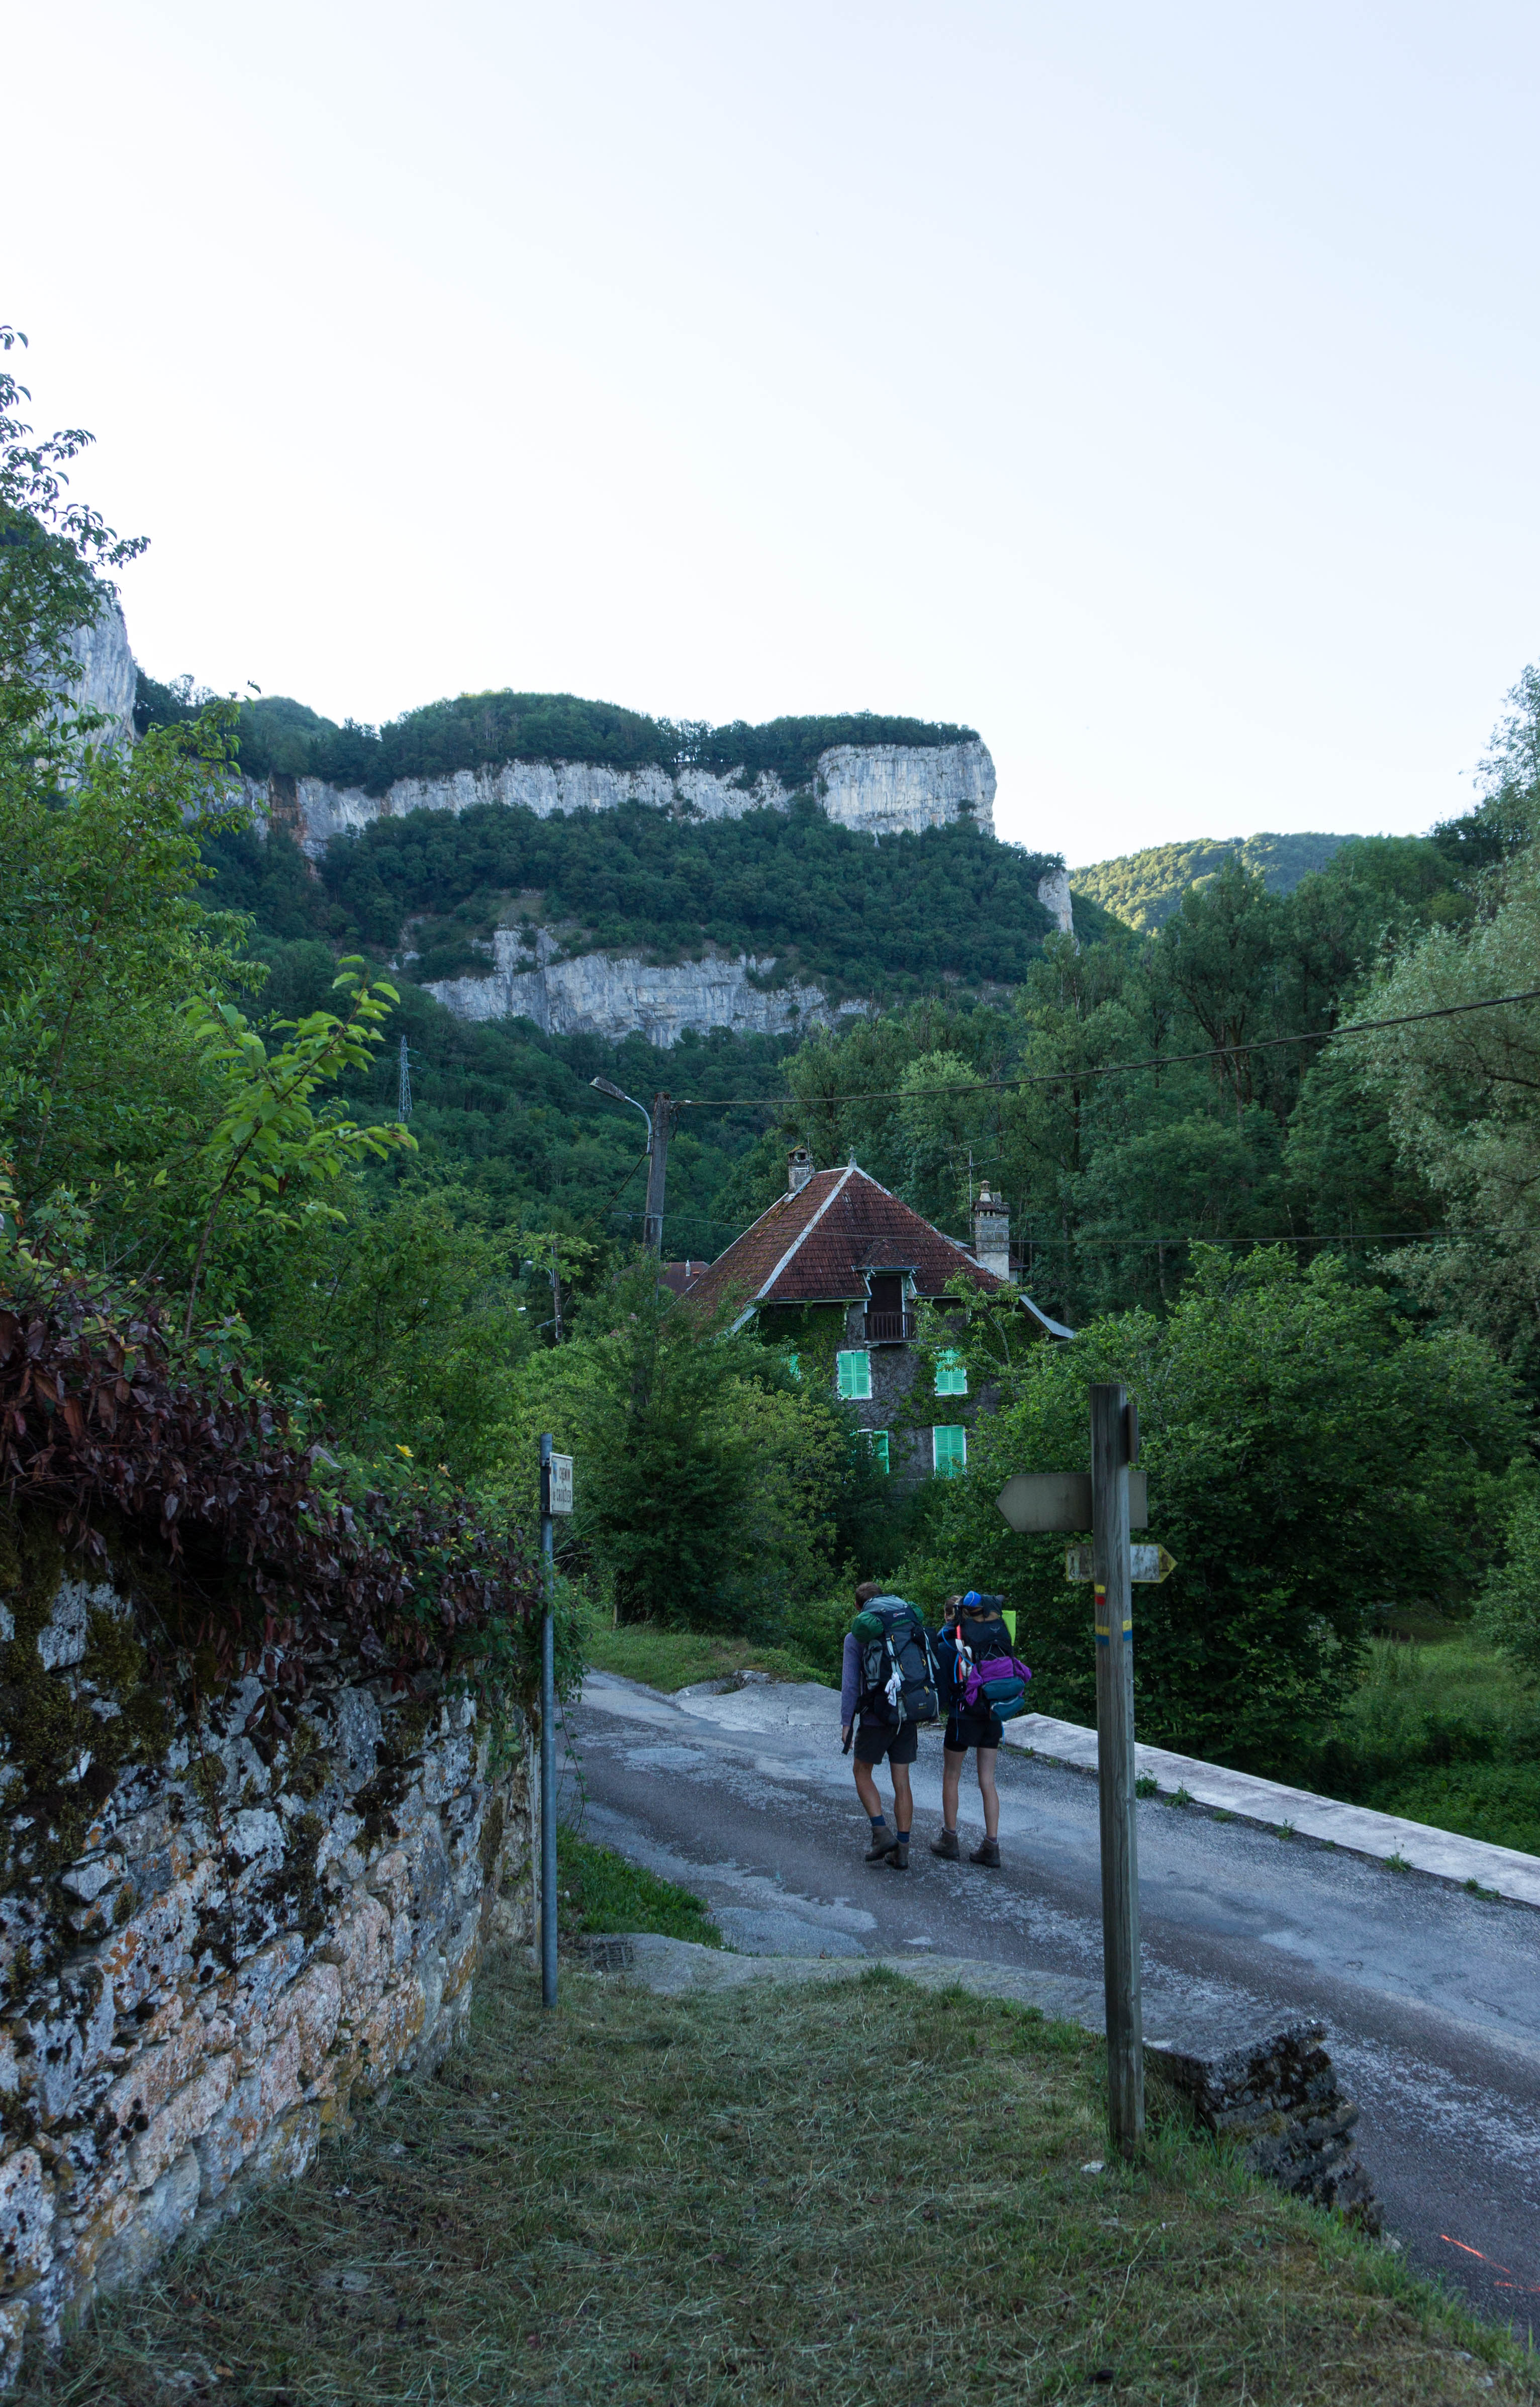 French Border Source of the River Loue Gorge